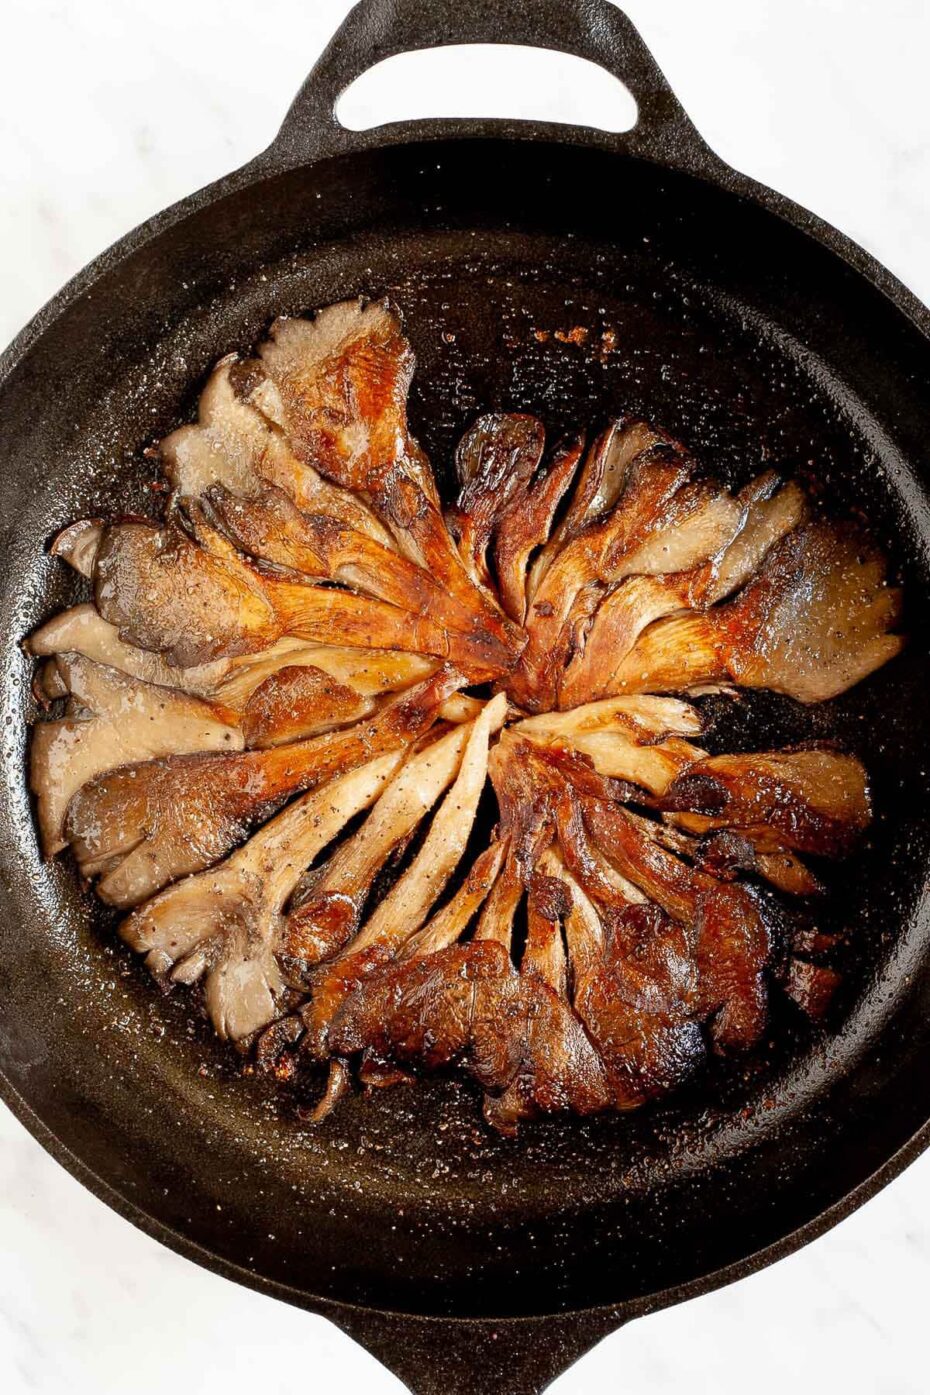 Black cast iron skillet from above with crispy dark brown juicy flattened oyster mushroom clusters